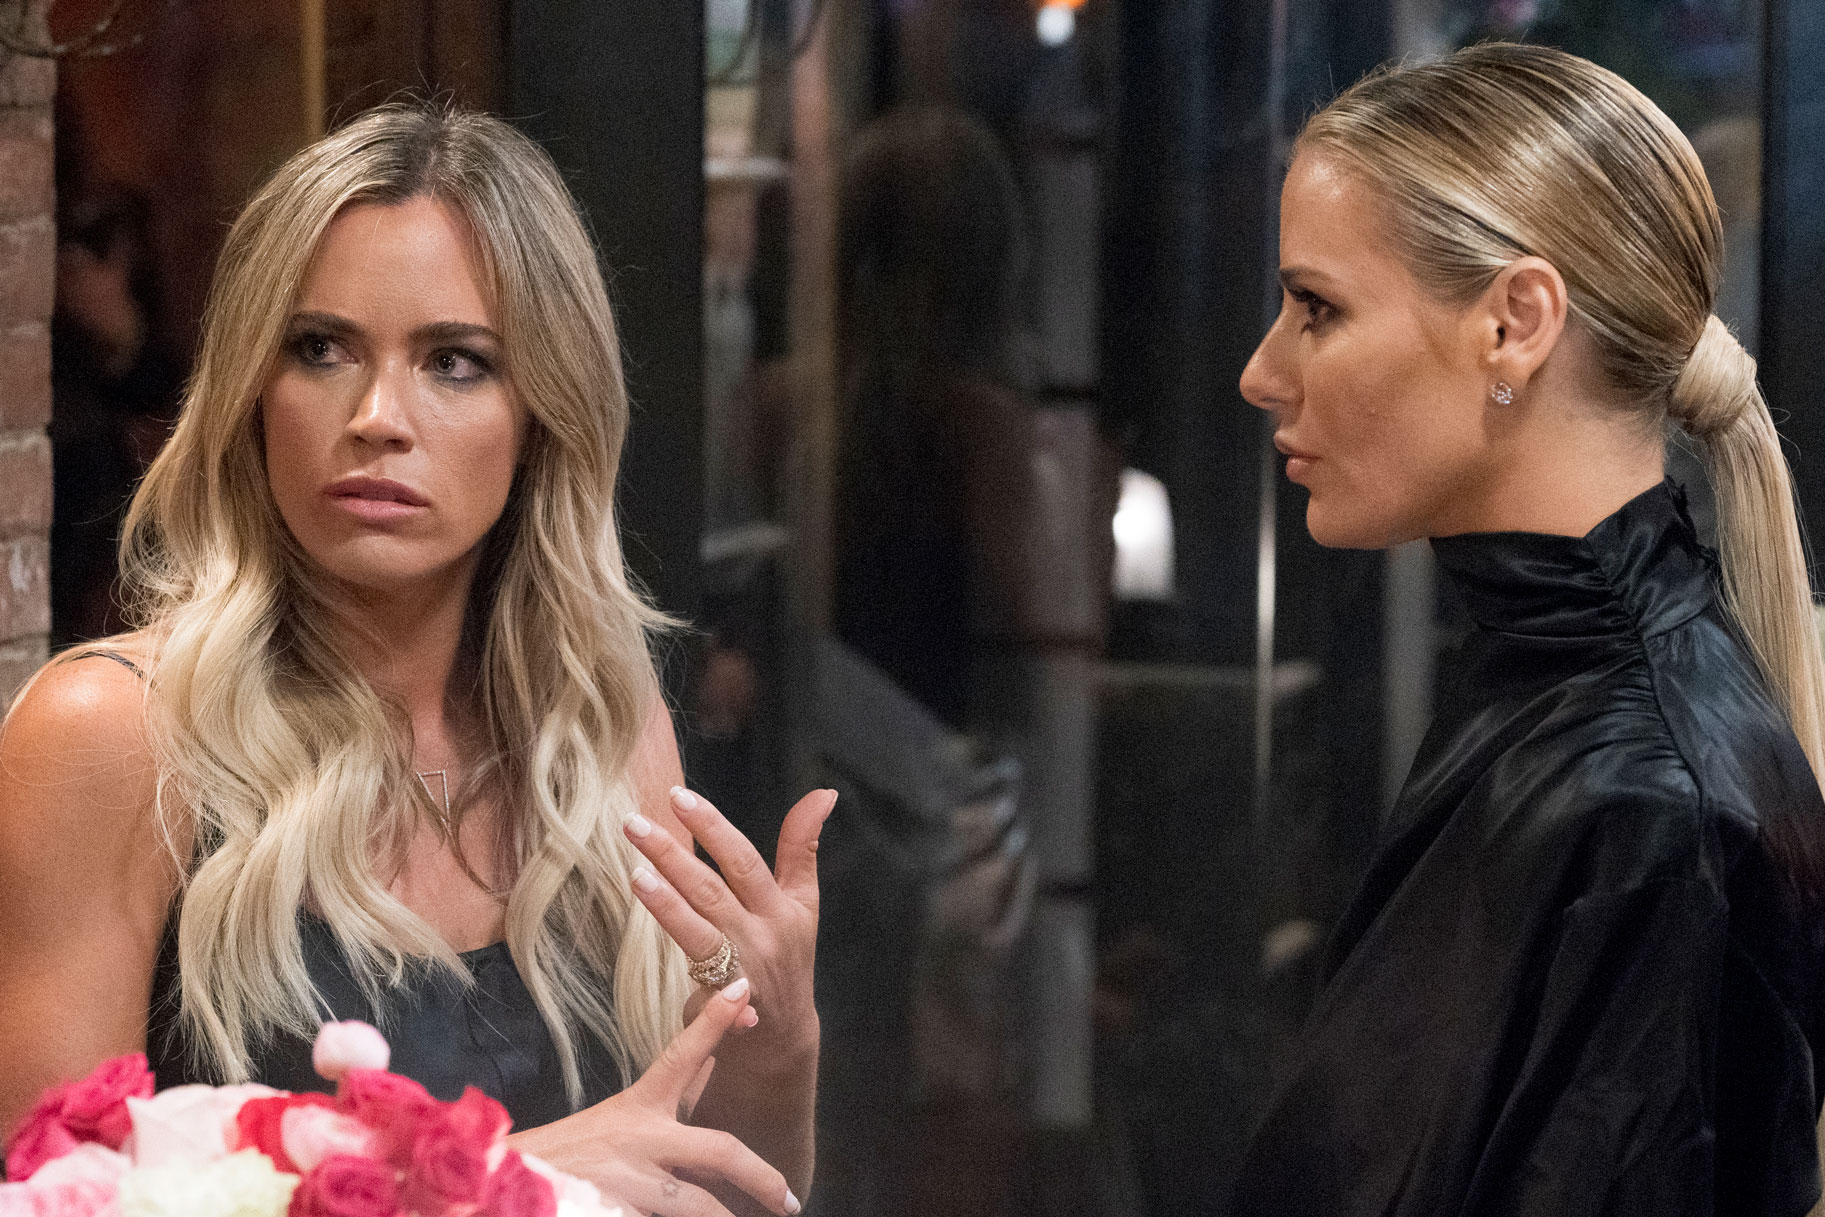 Teddi Mellencamp Arroyave and Dorit Kemsley in The Real Housewives of Beverly Hills Season 9